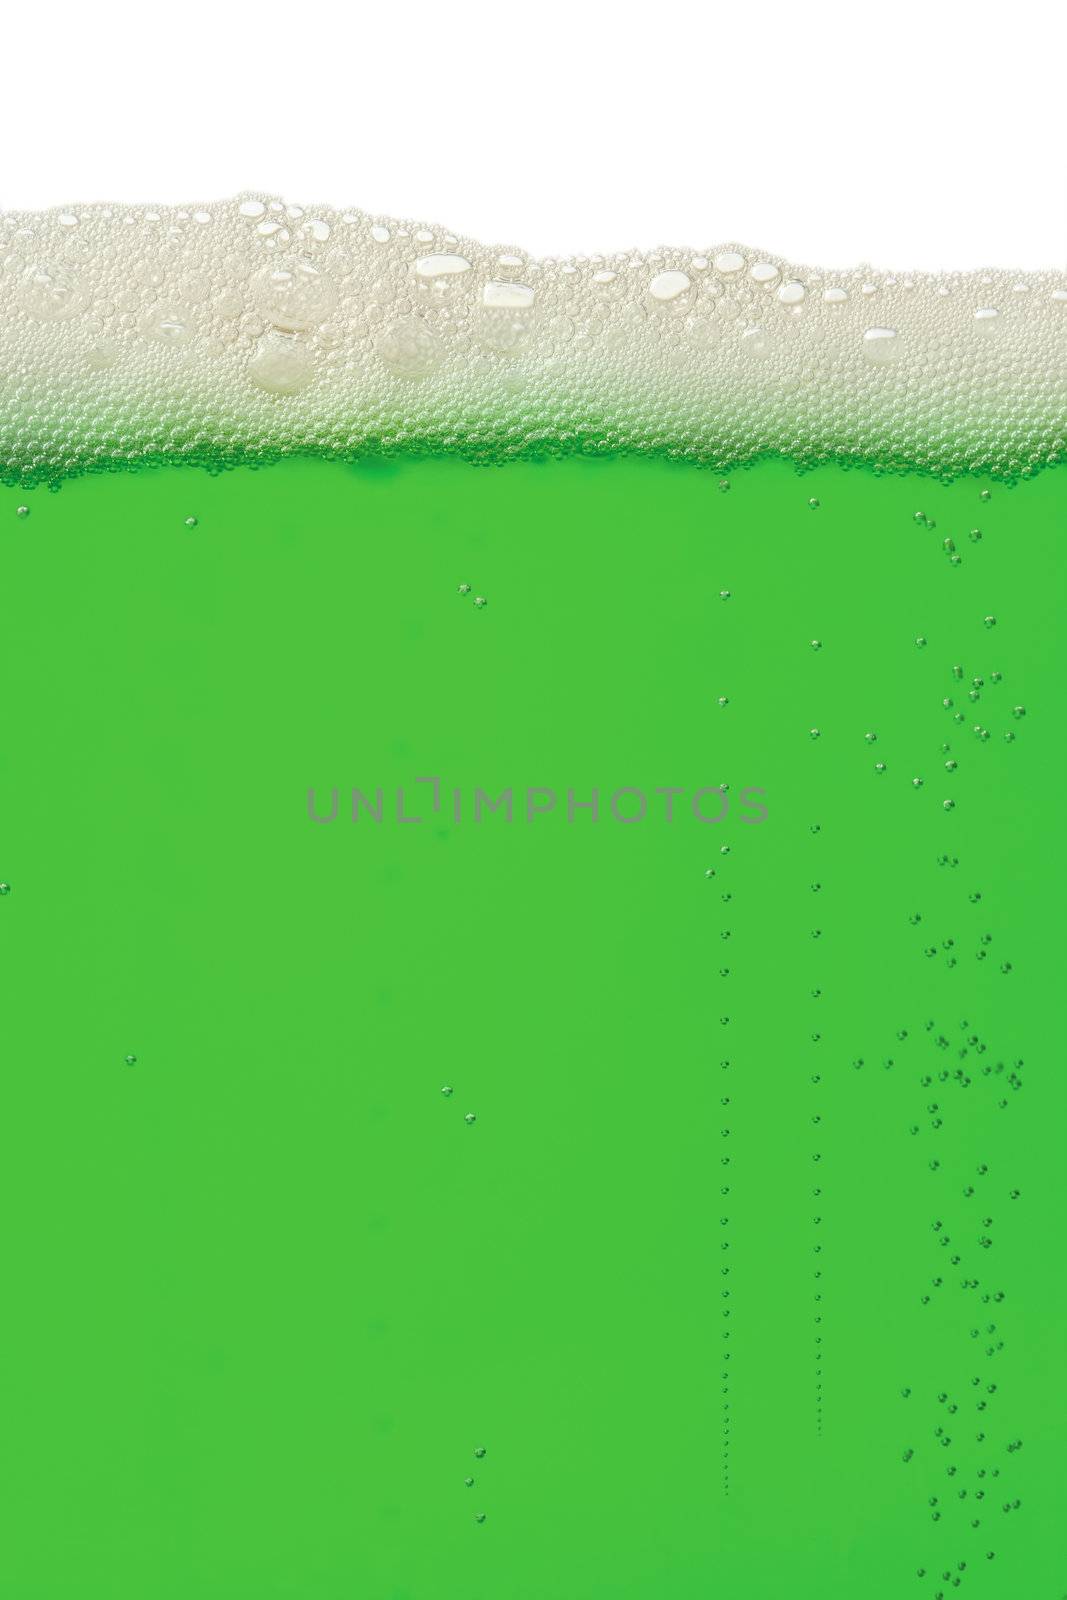 Green beer background by sumners